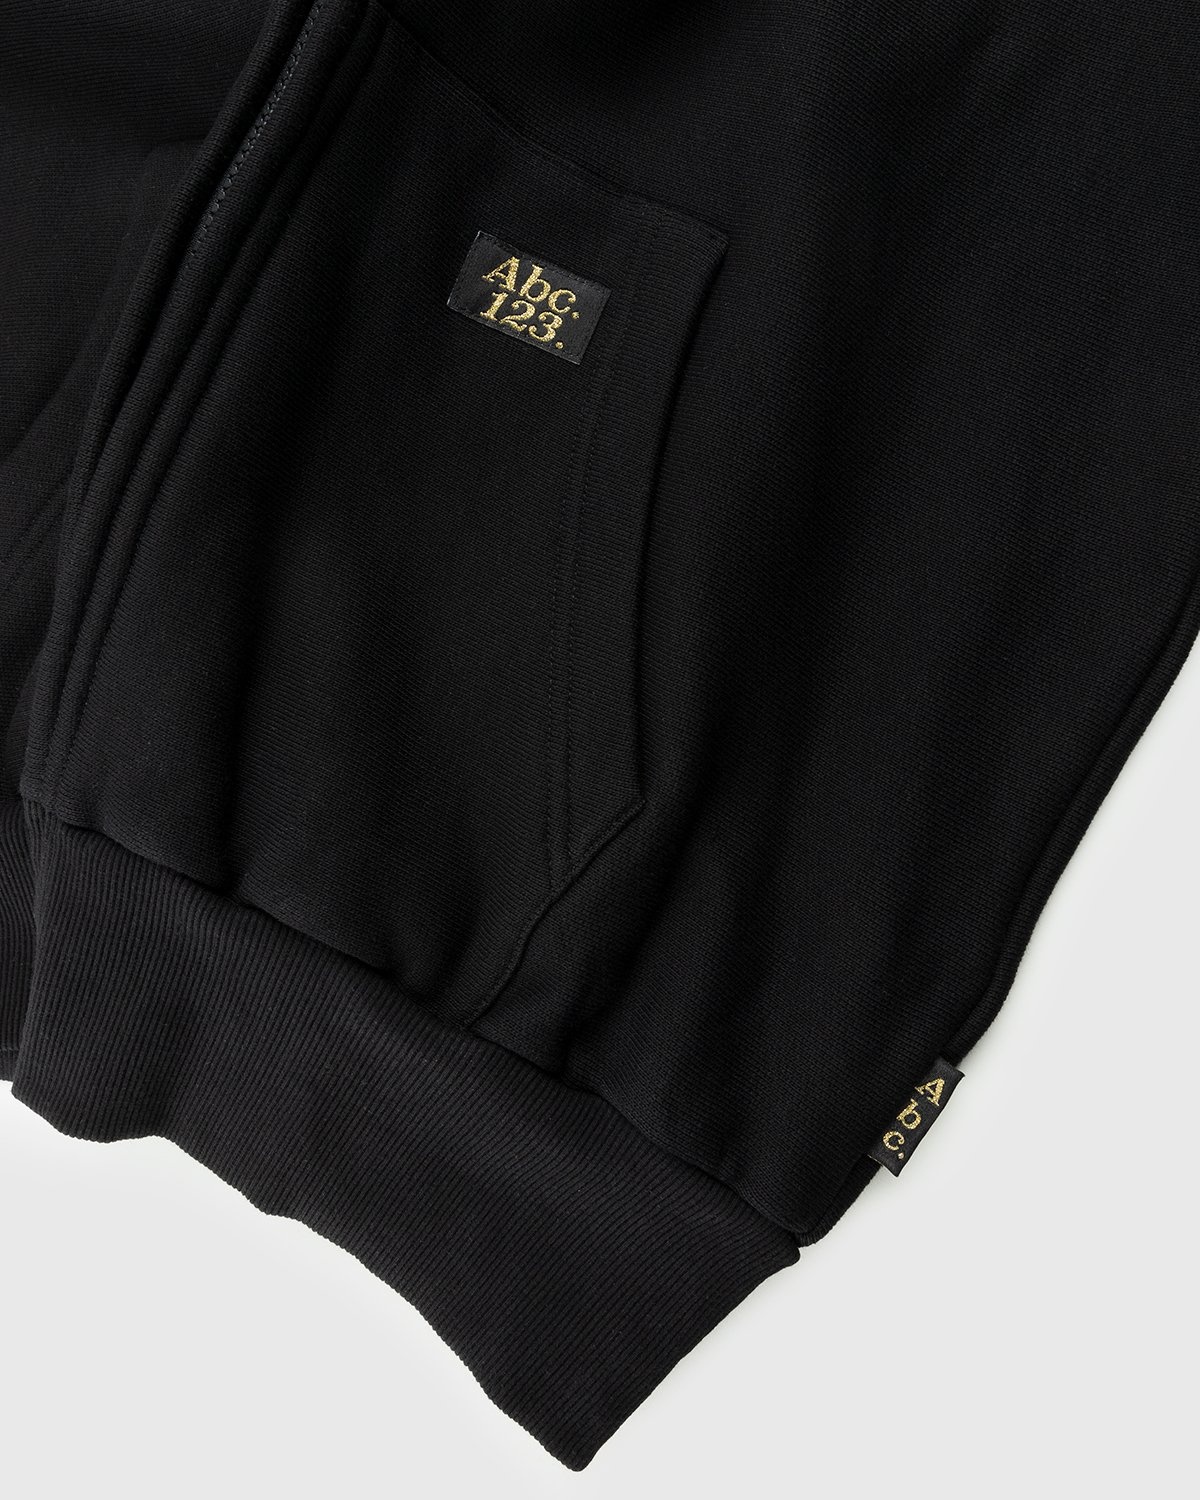 Abc. – Zip-Up French Terry Hoodie Anthracite - Zip-Up Sweats - Black - Image 5